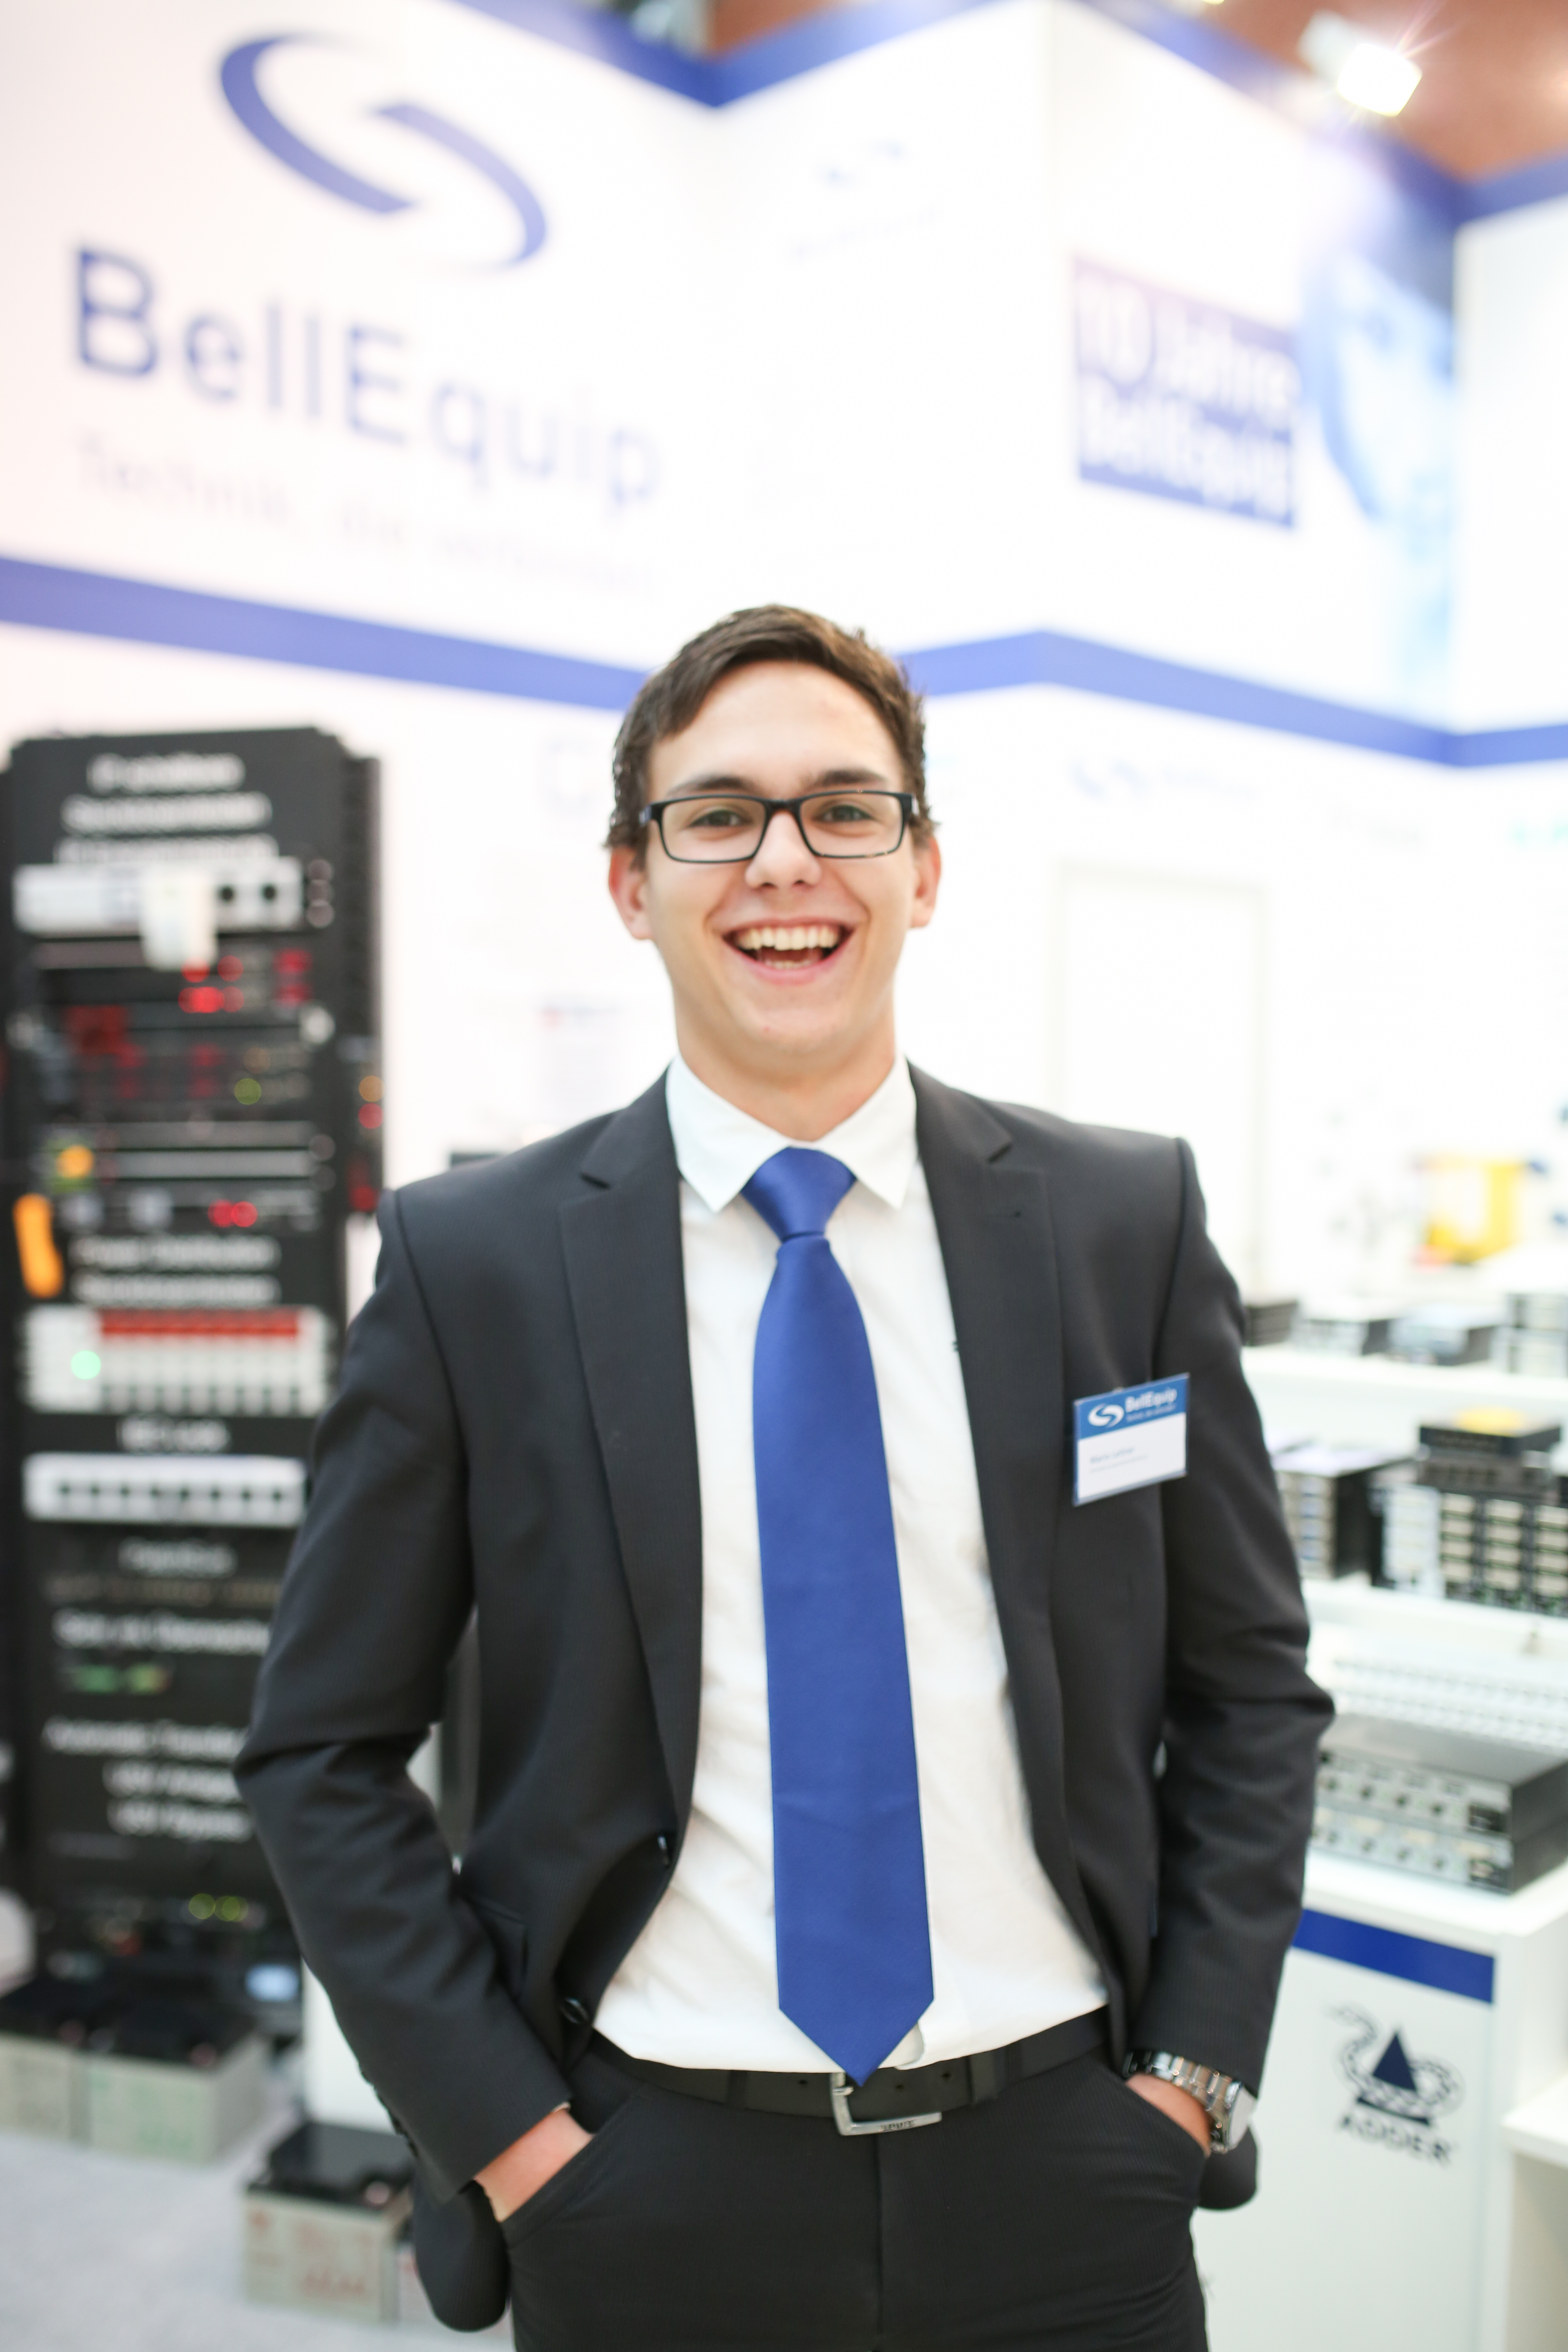 bellquip-gmbh-040-mario-leitner-smart-automation-2015